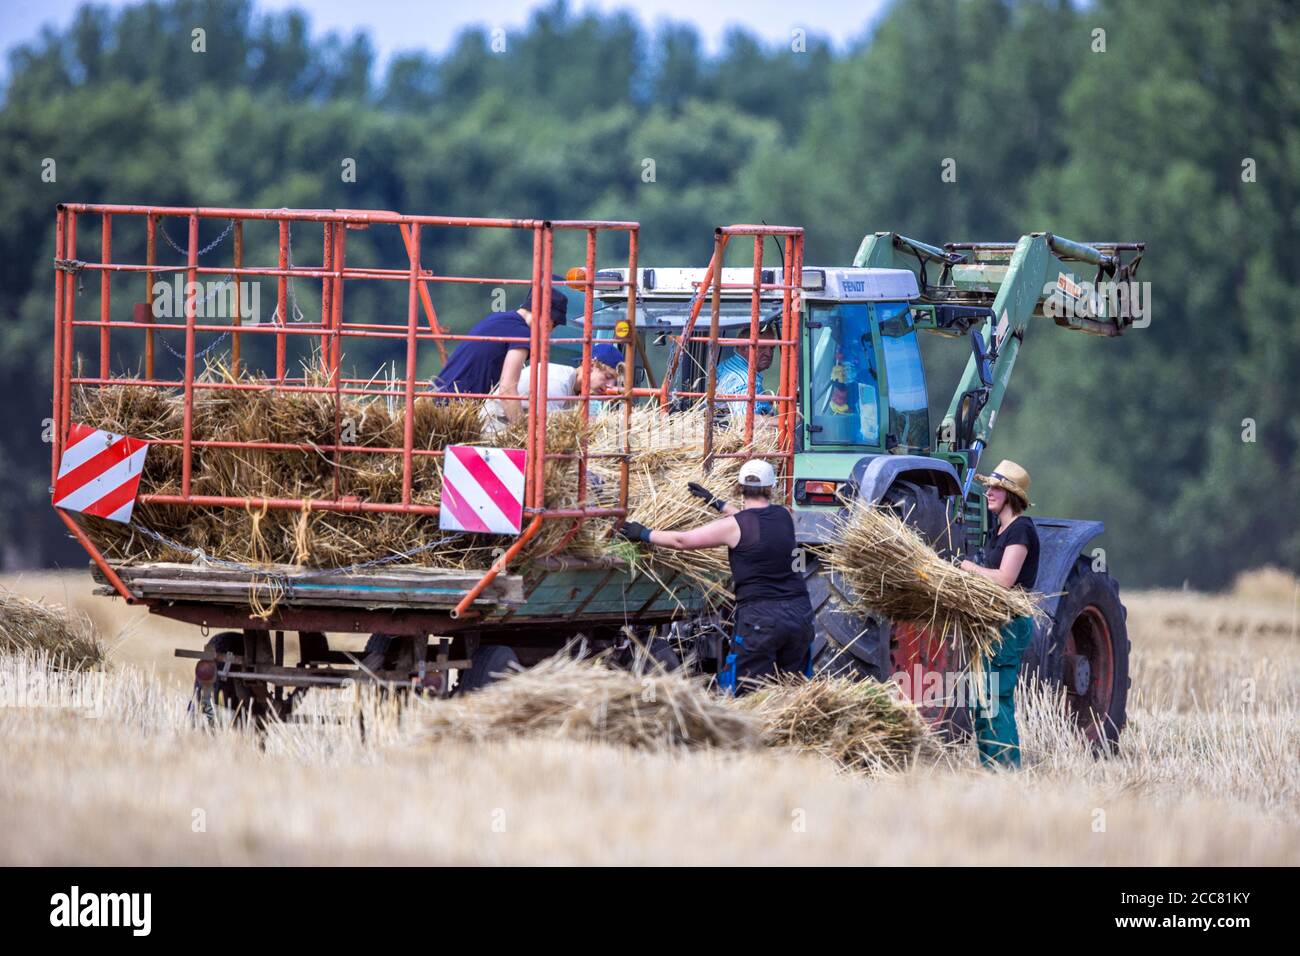 01 August 2020, Schleswig-Holstein, Lübeck: When harvesting rye straw for the production of drinking straws in the field near Lübeck, helpers throw the yarbs of straw onto a trailer. From July 2021 at the latest, plastic drinking straws may no longer be sold throughout the EU. As an alternative to the colourful drinking straws made of plastic, special rye is harvested on an area of two hectares near Lübeck and drinking straws are made from it. For many years Strohmi GmbH has been supplying these sustainable straws to hotels, upscale bars and restaurants as well as private individuals all over Stock Photo